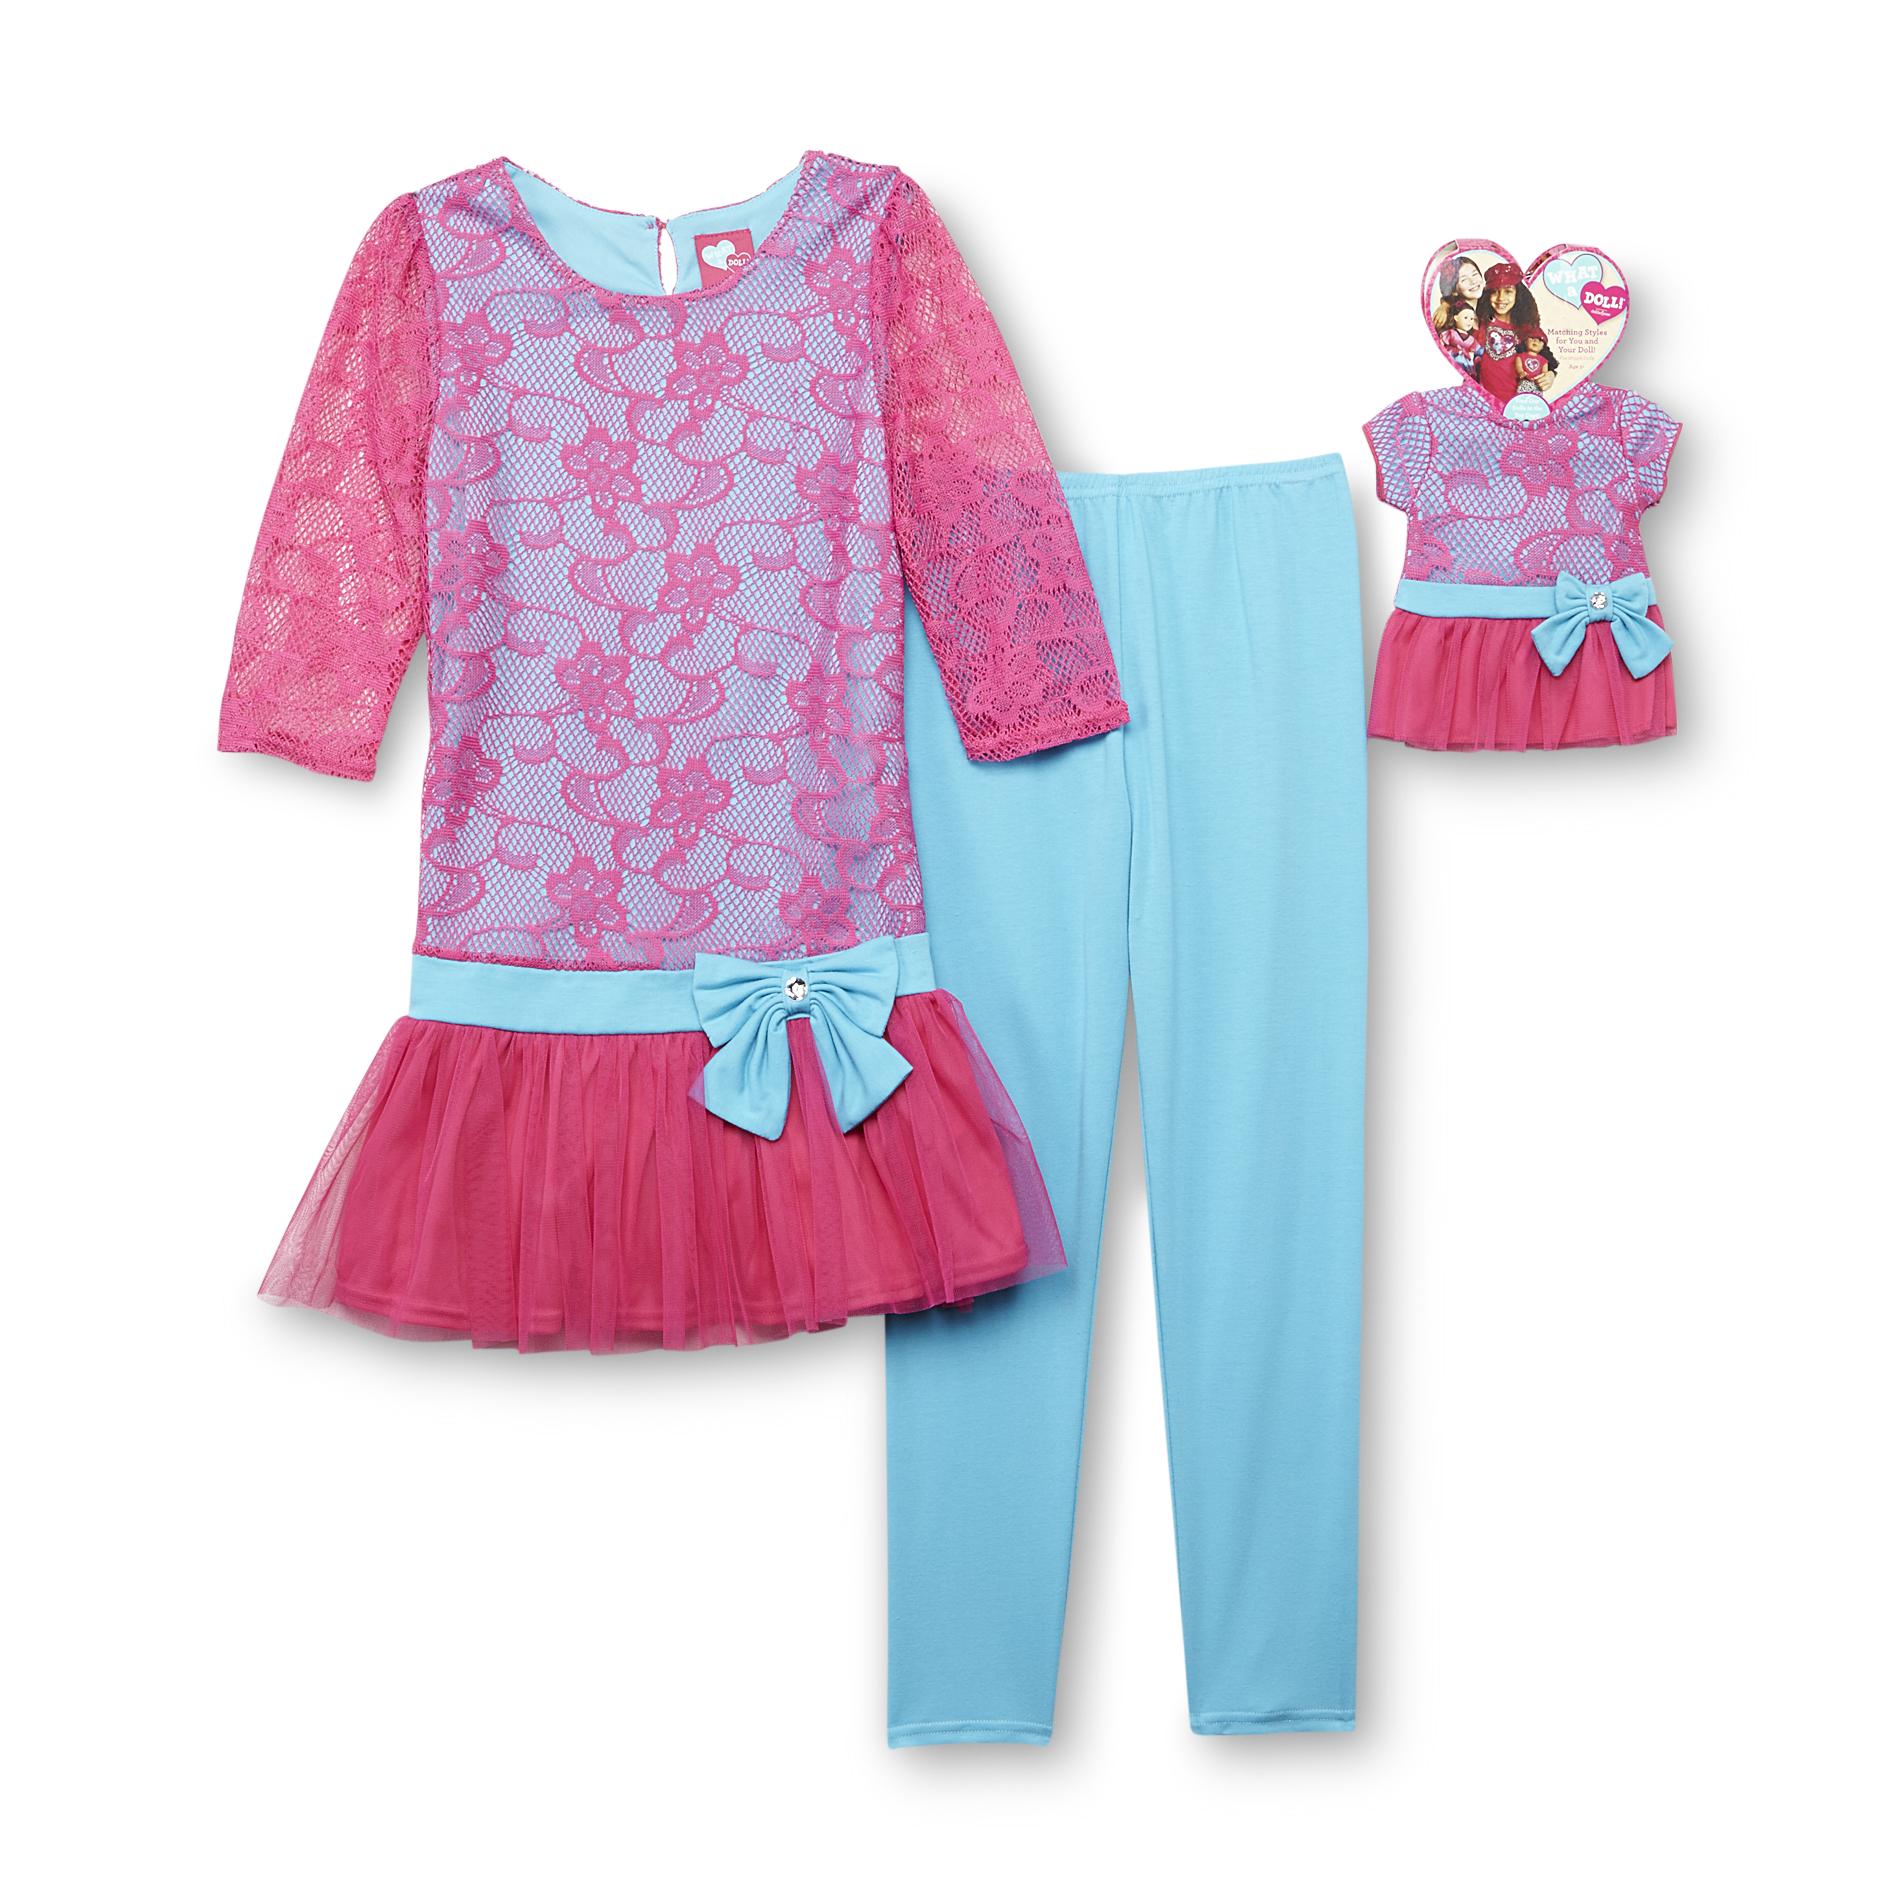 What A Doll Girl's Lace Tunic Top  Leggings & Doll Outfit